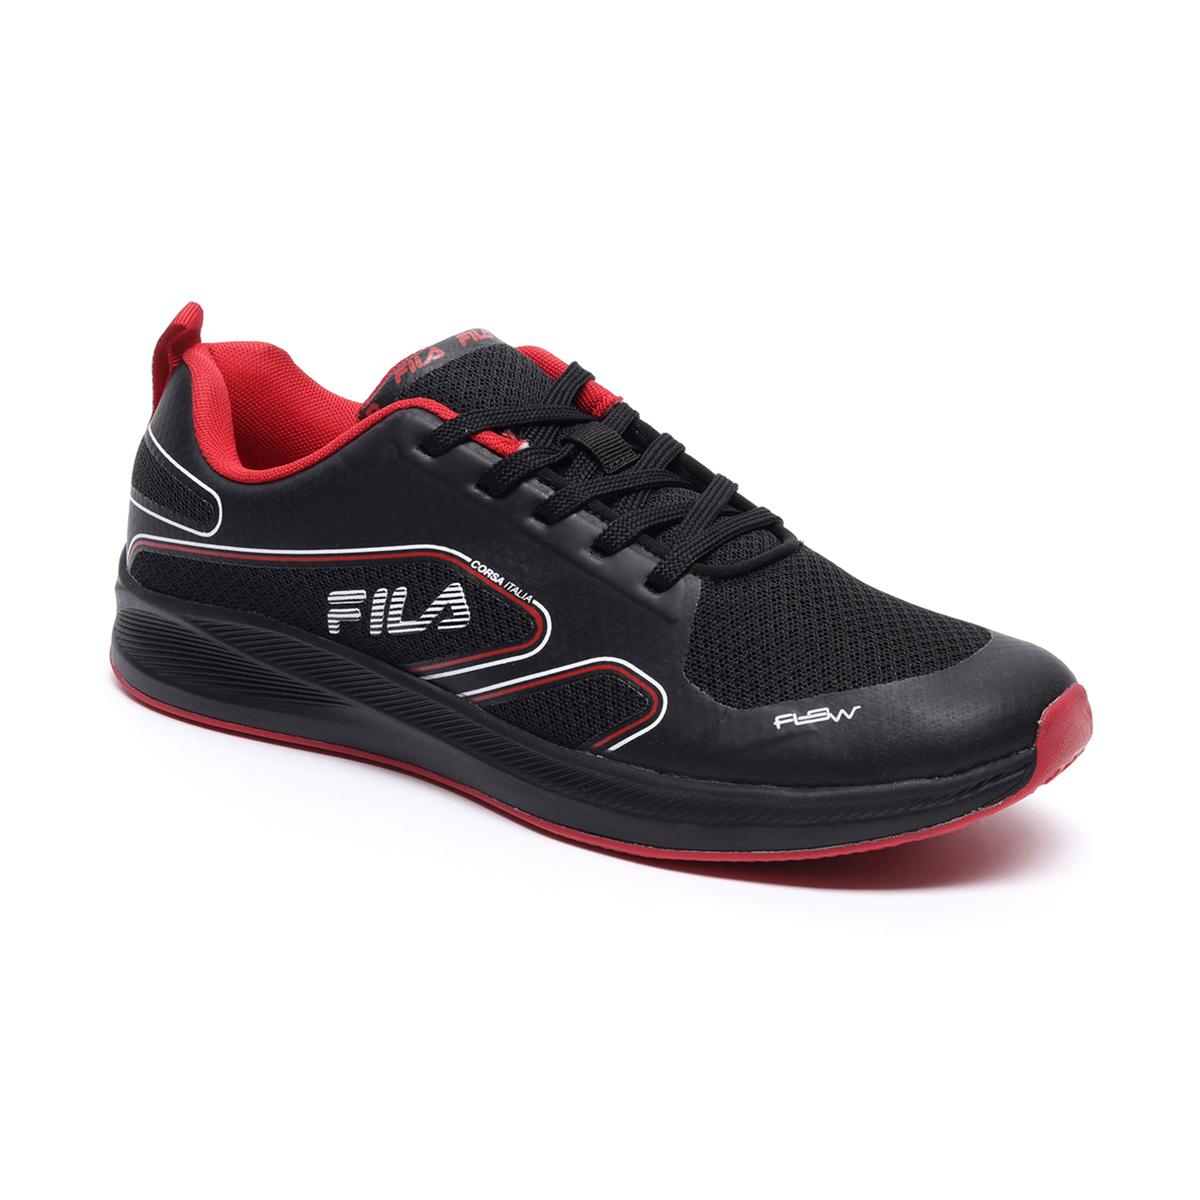 Discover 274+ fila sneakers for ladies latest